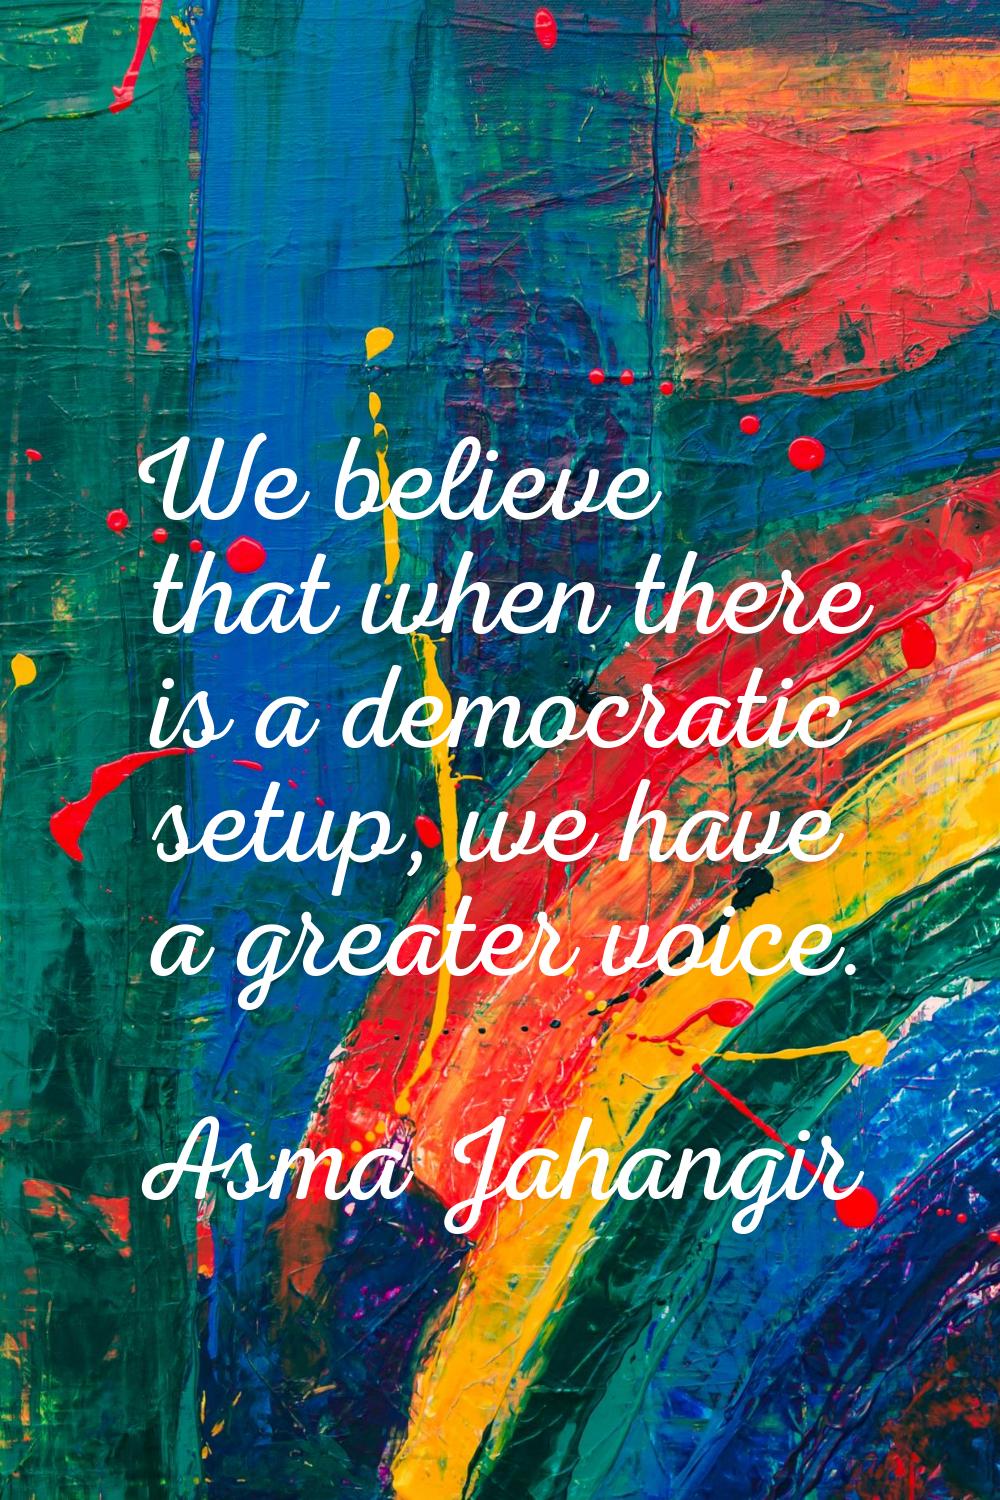 We believe that when there is a democratic setup, we have a greater voice.